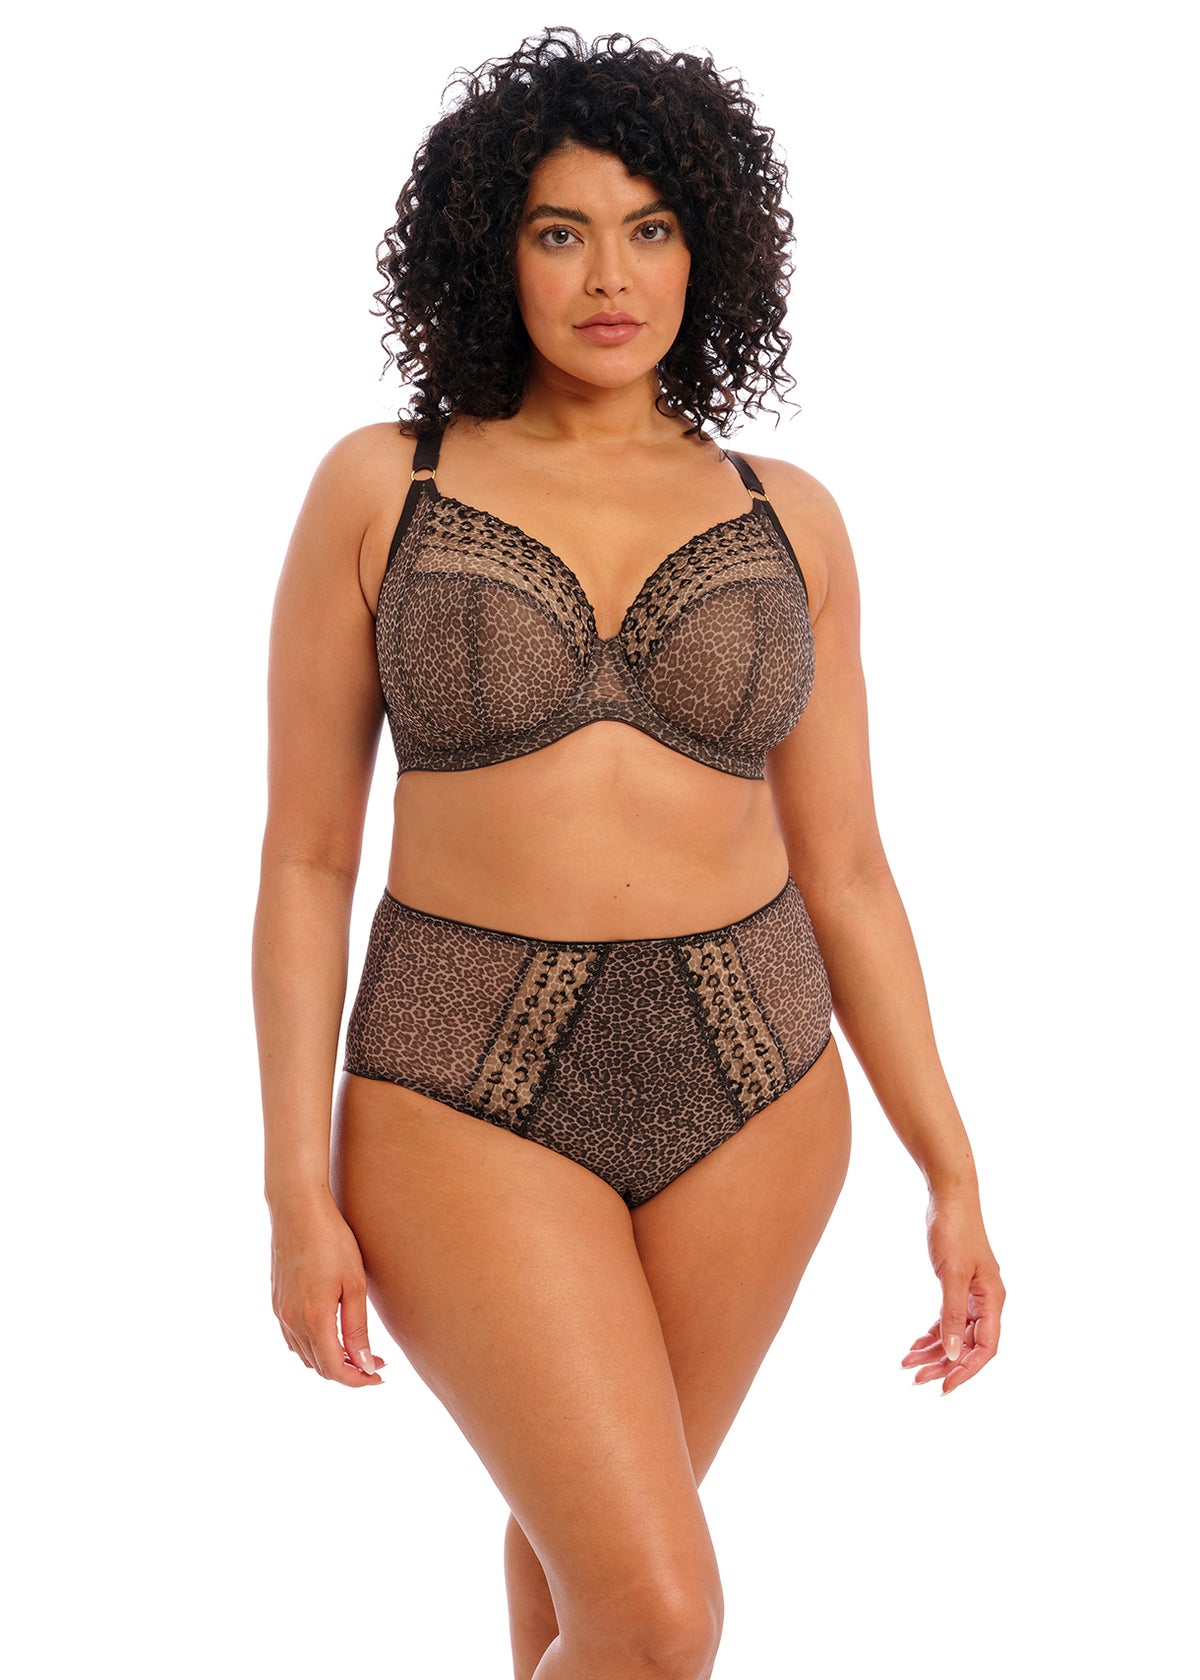 Matilda Full Brief and Plunge Bra - Leopard worn by model, front view